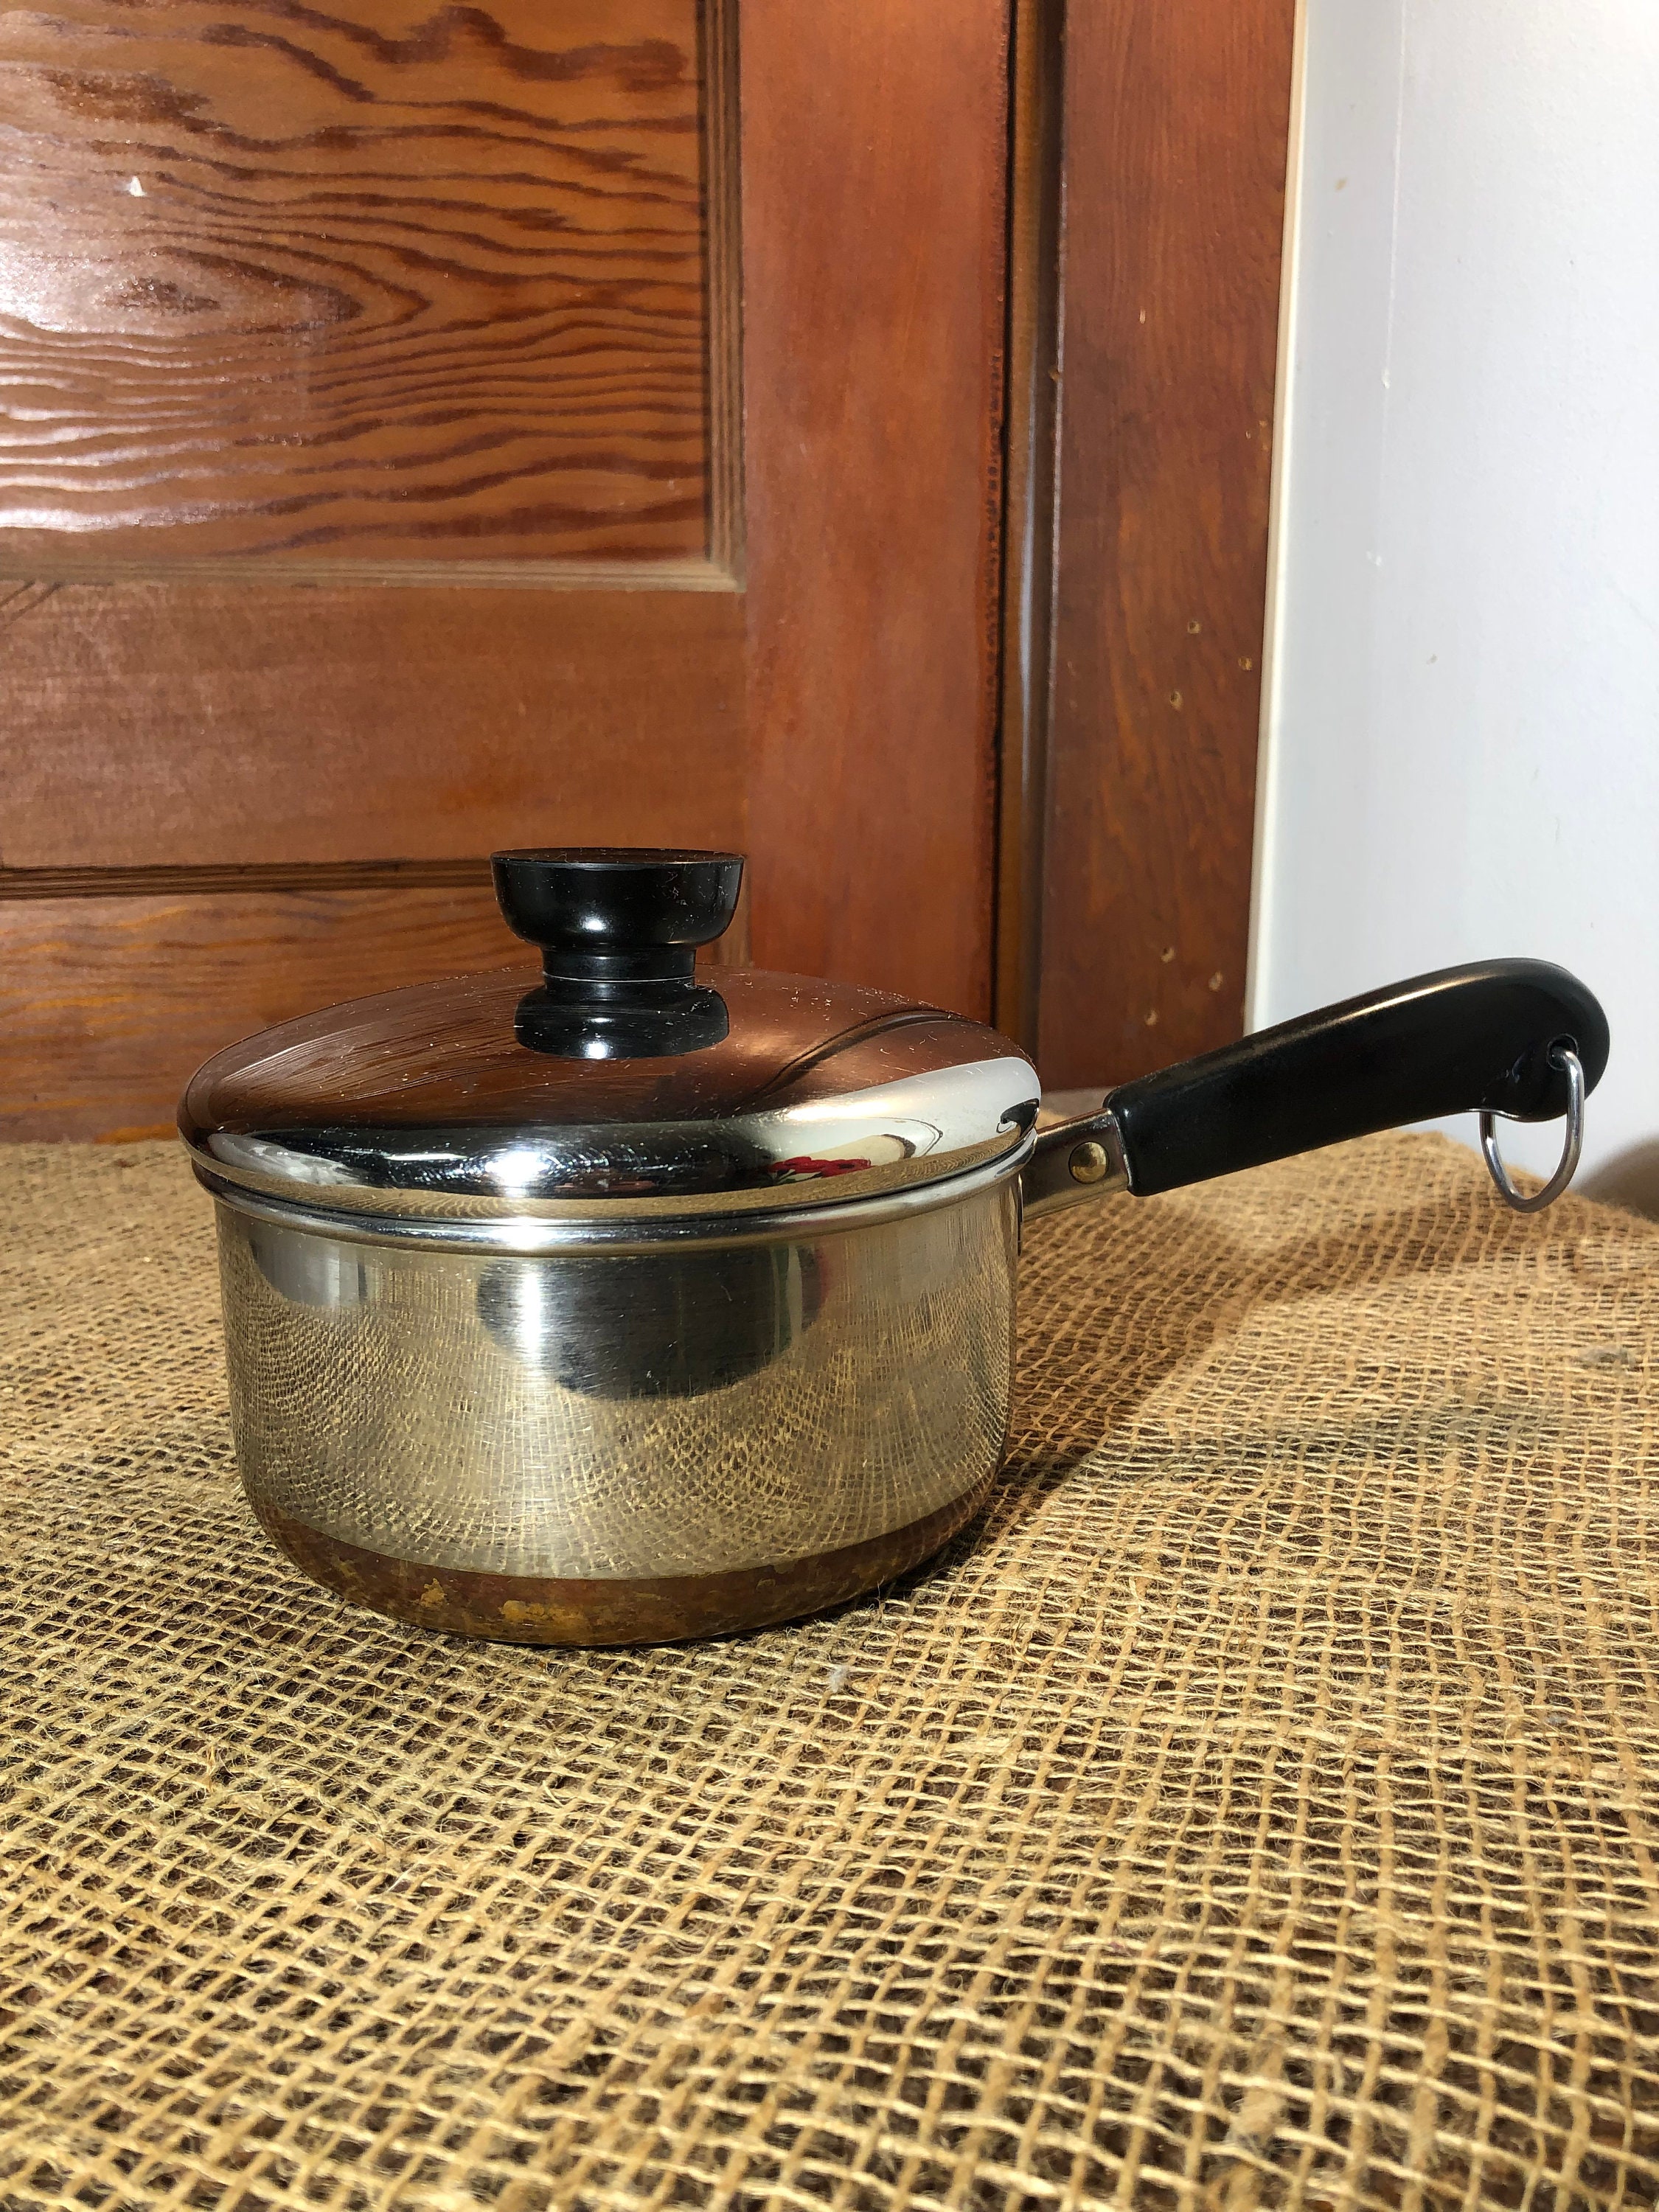 8 3/4/9 Lid REVERE WARE Replacement Stainless Steel Vintage on eBid Italy